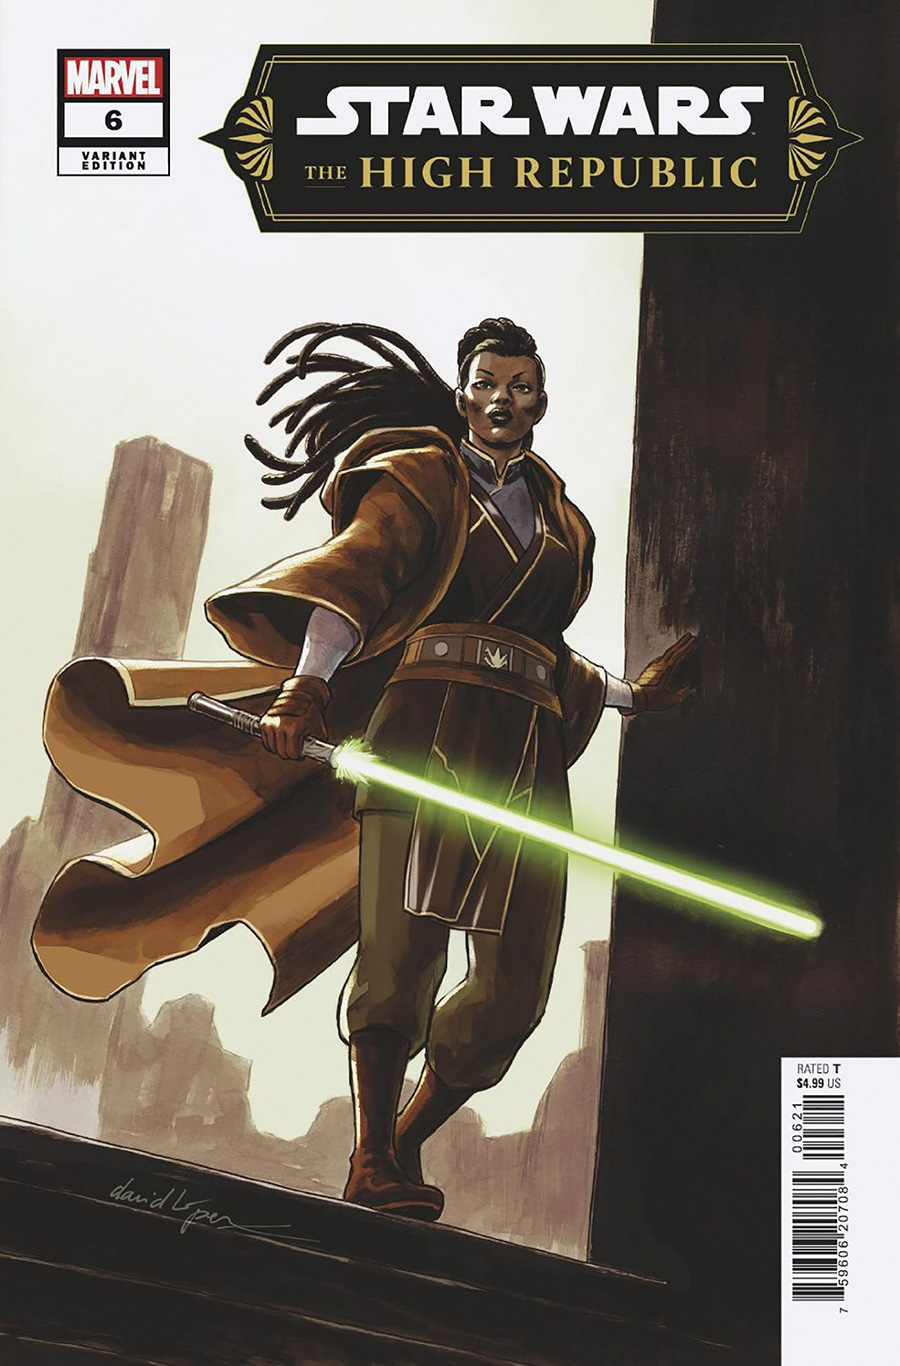 Star Wars The High Republic Vol 3 #6 Cover C Variant David Lopez Cover